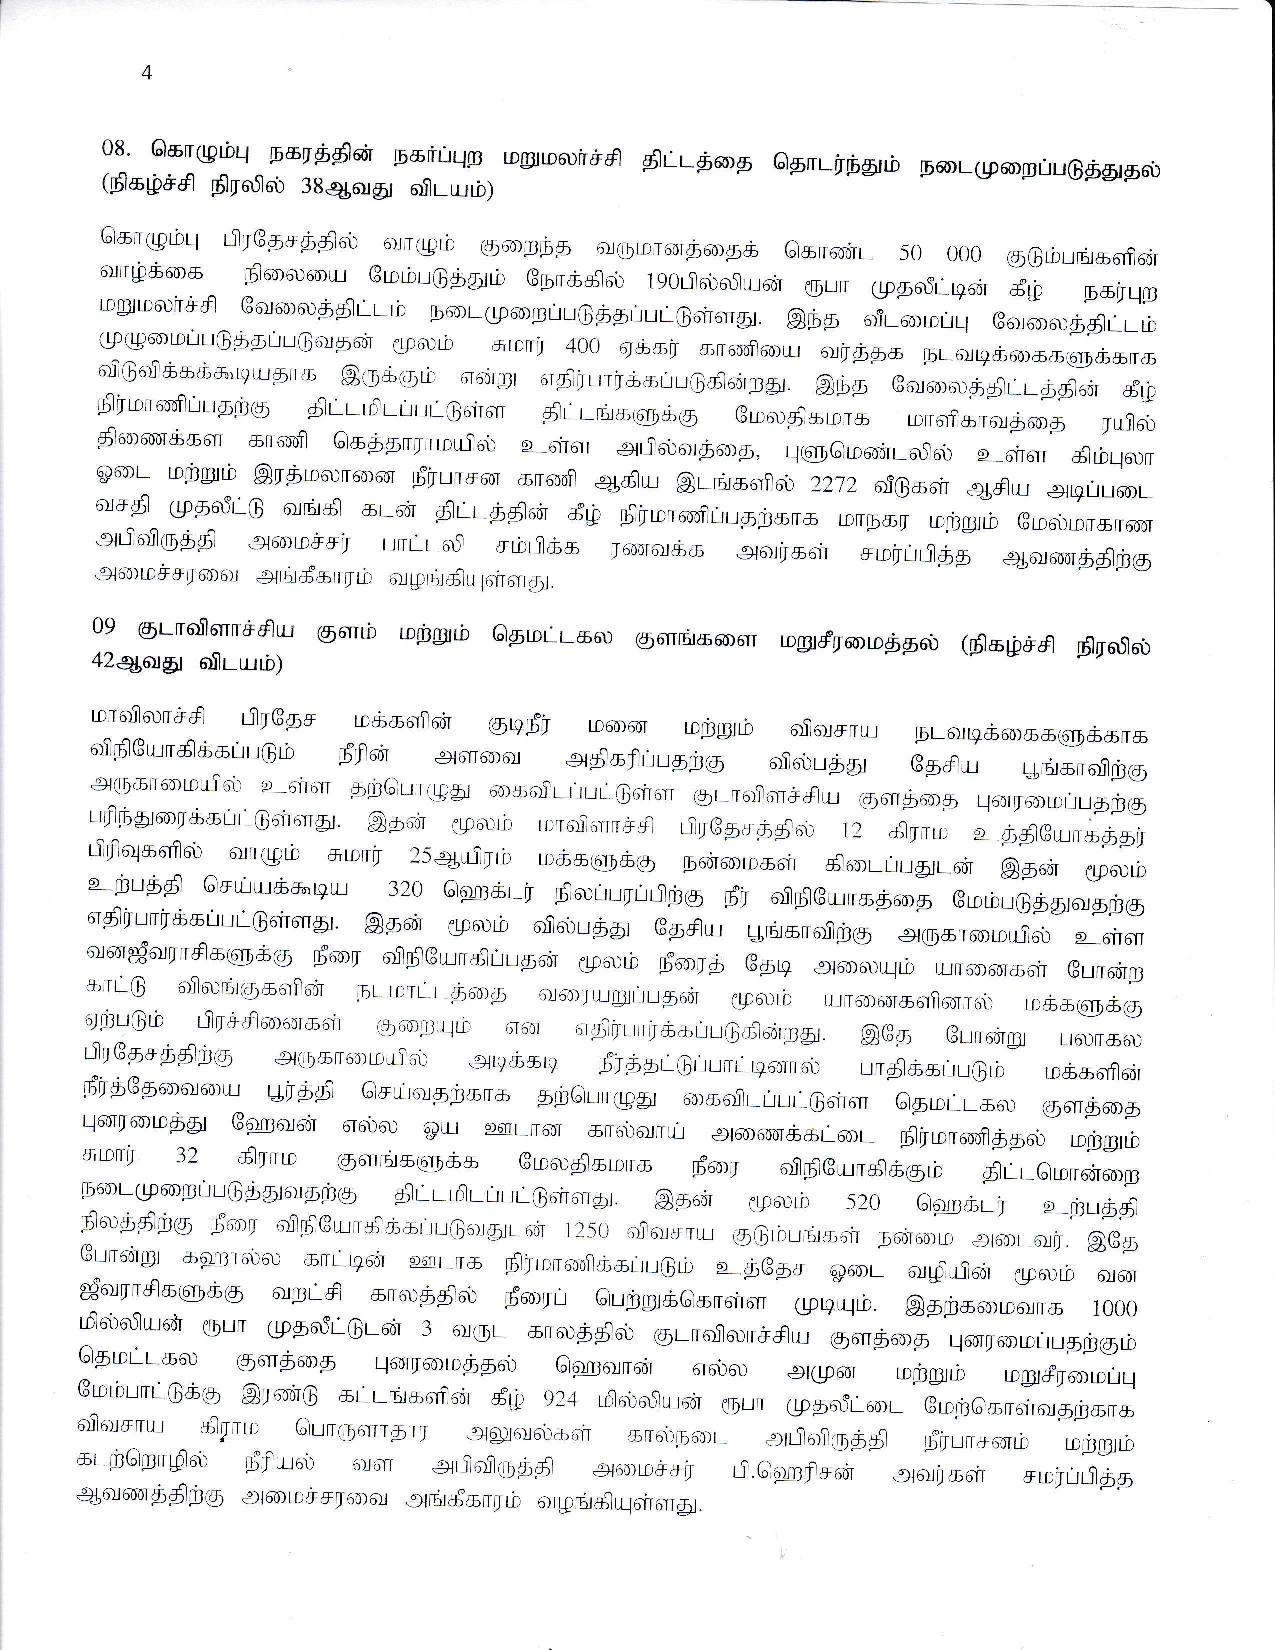 Cabinet Decision on 21.05.2019 Tamil page 005